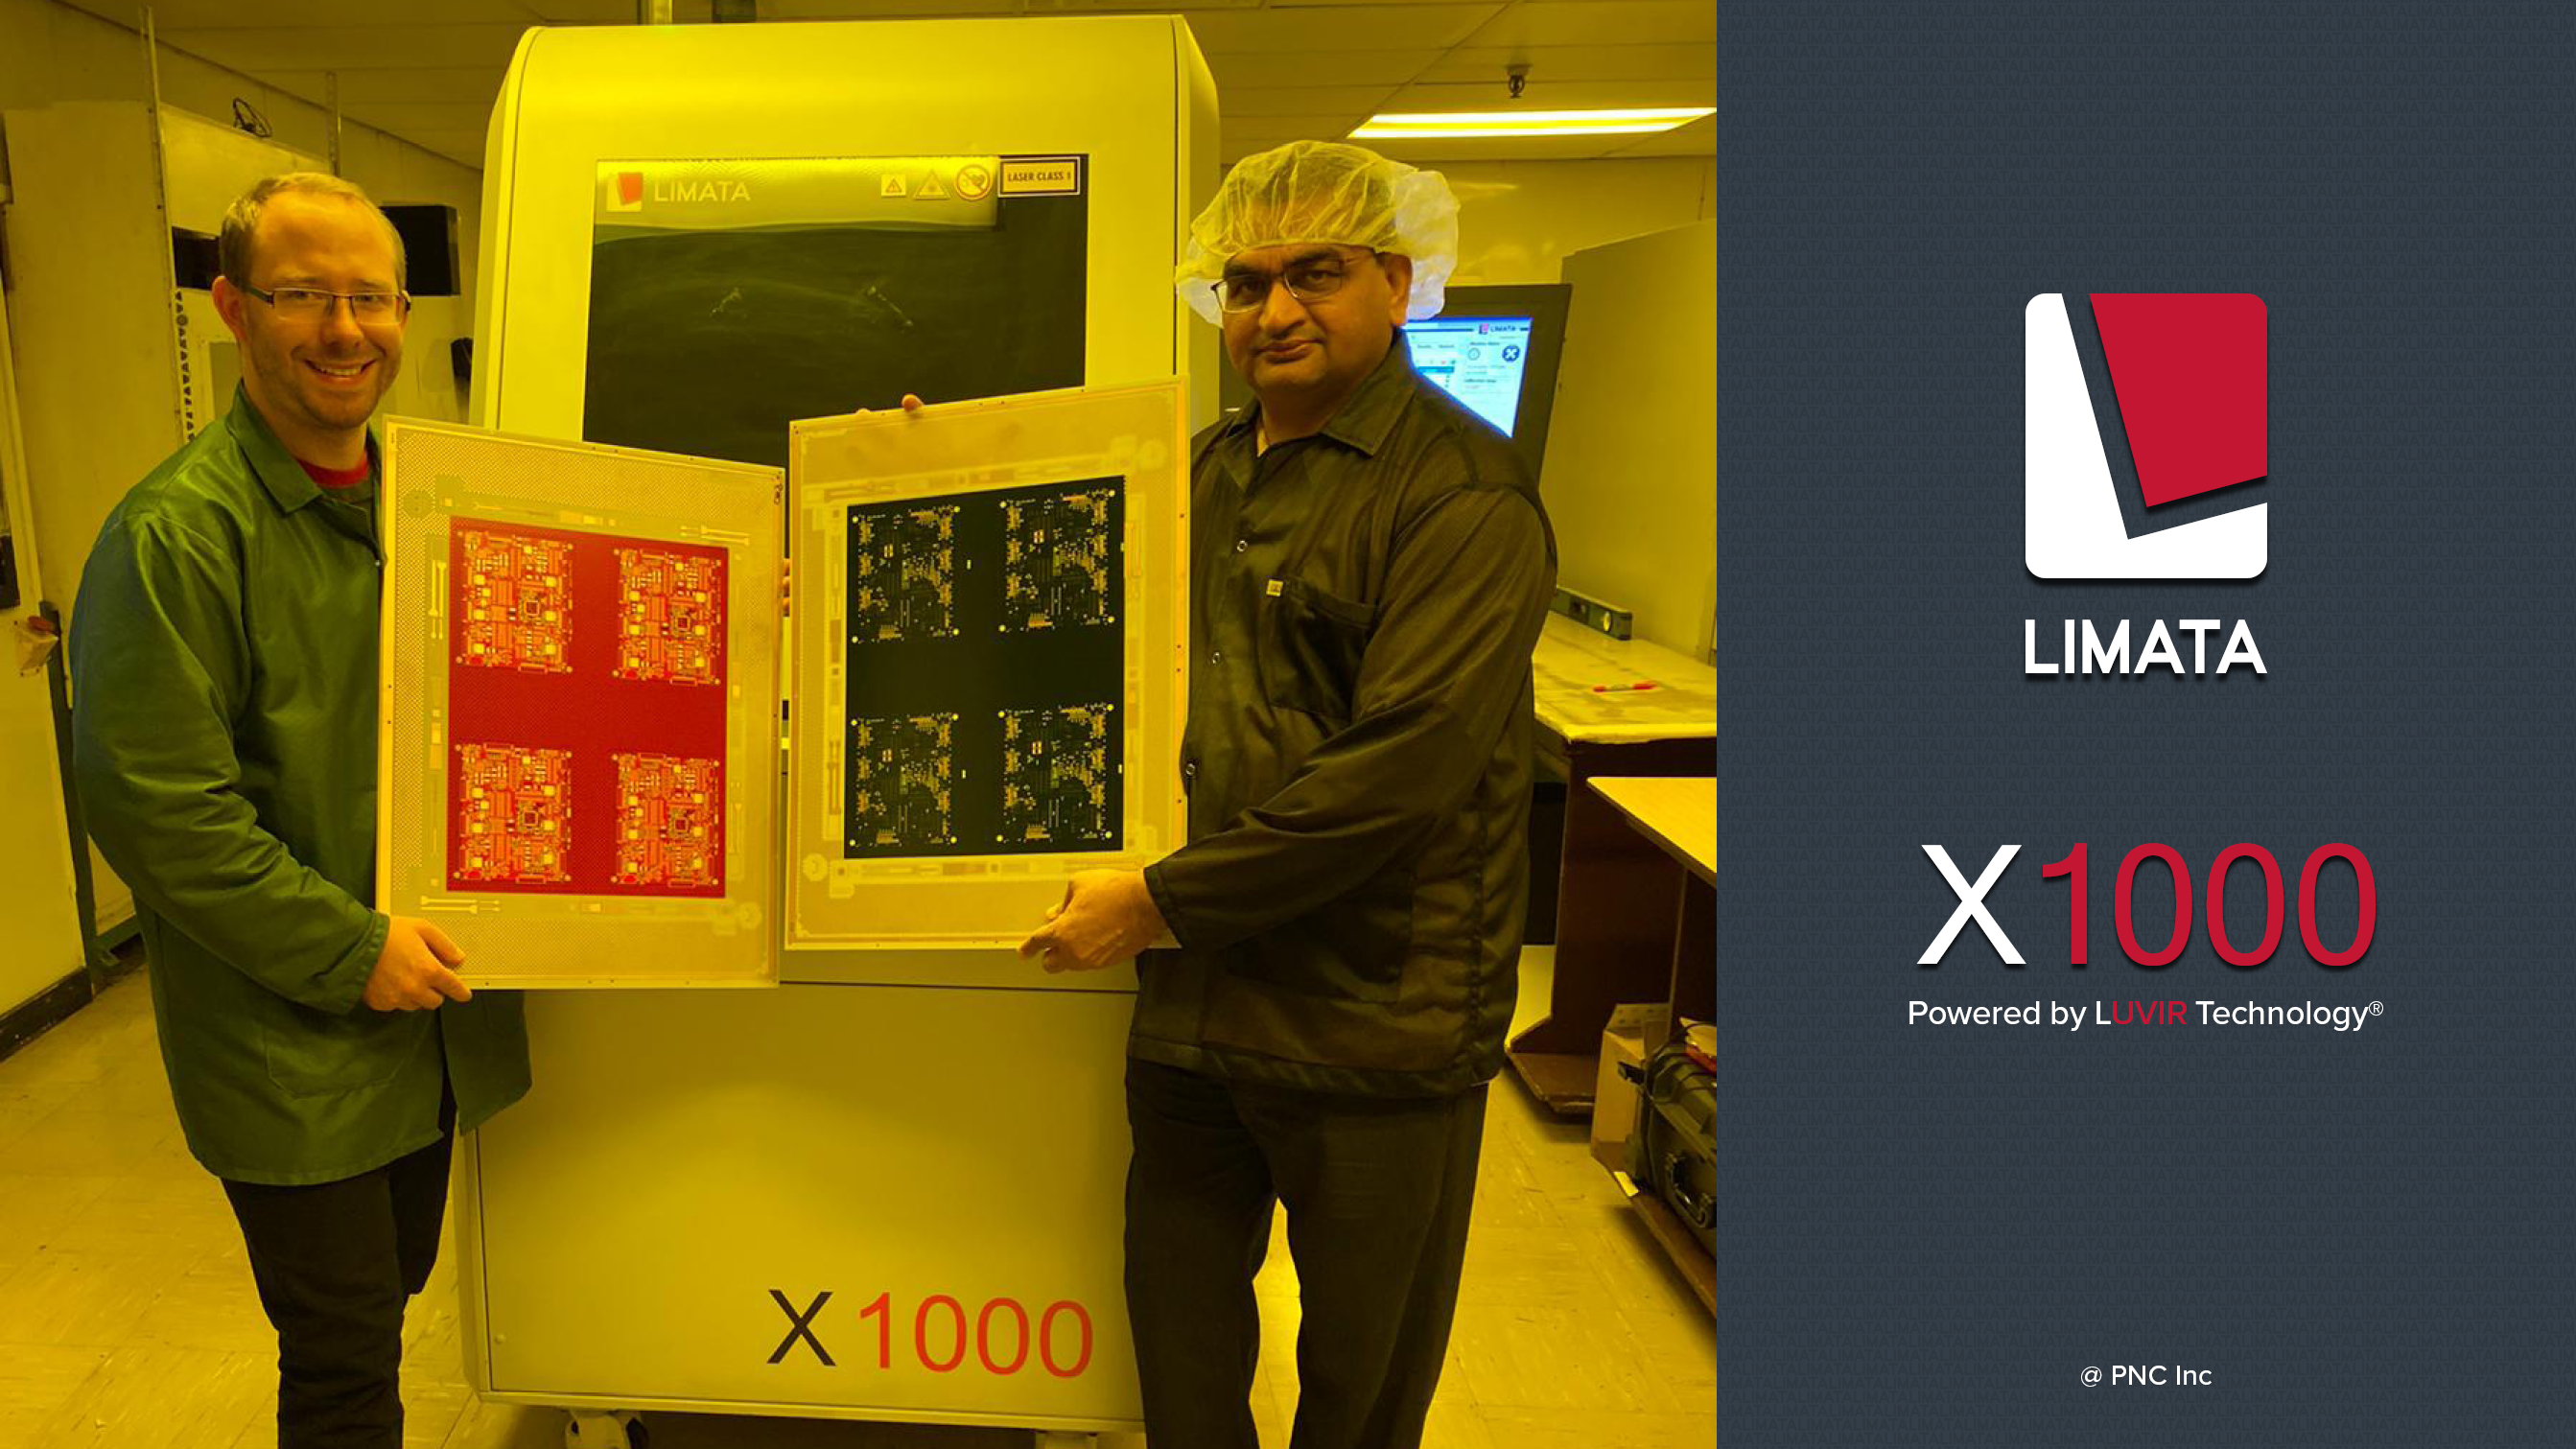 LIMATA X1000 Powered by LUVIr Technology at PNC Inc